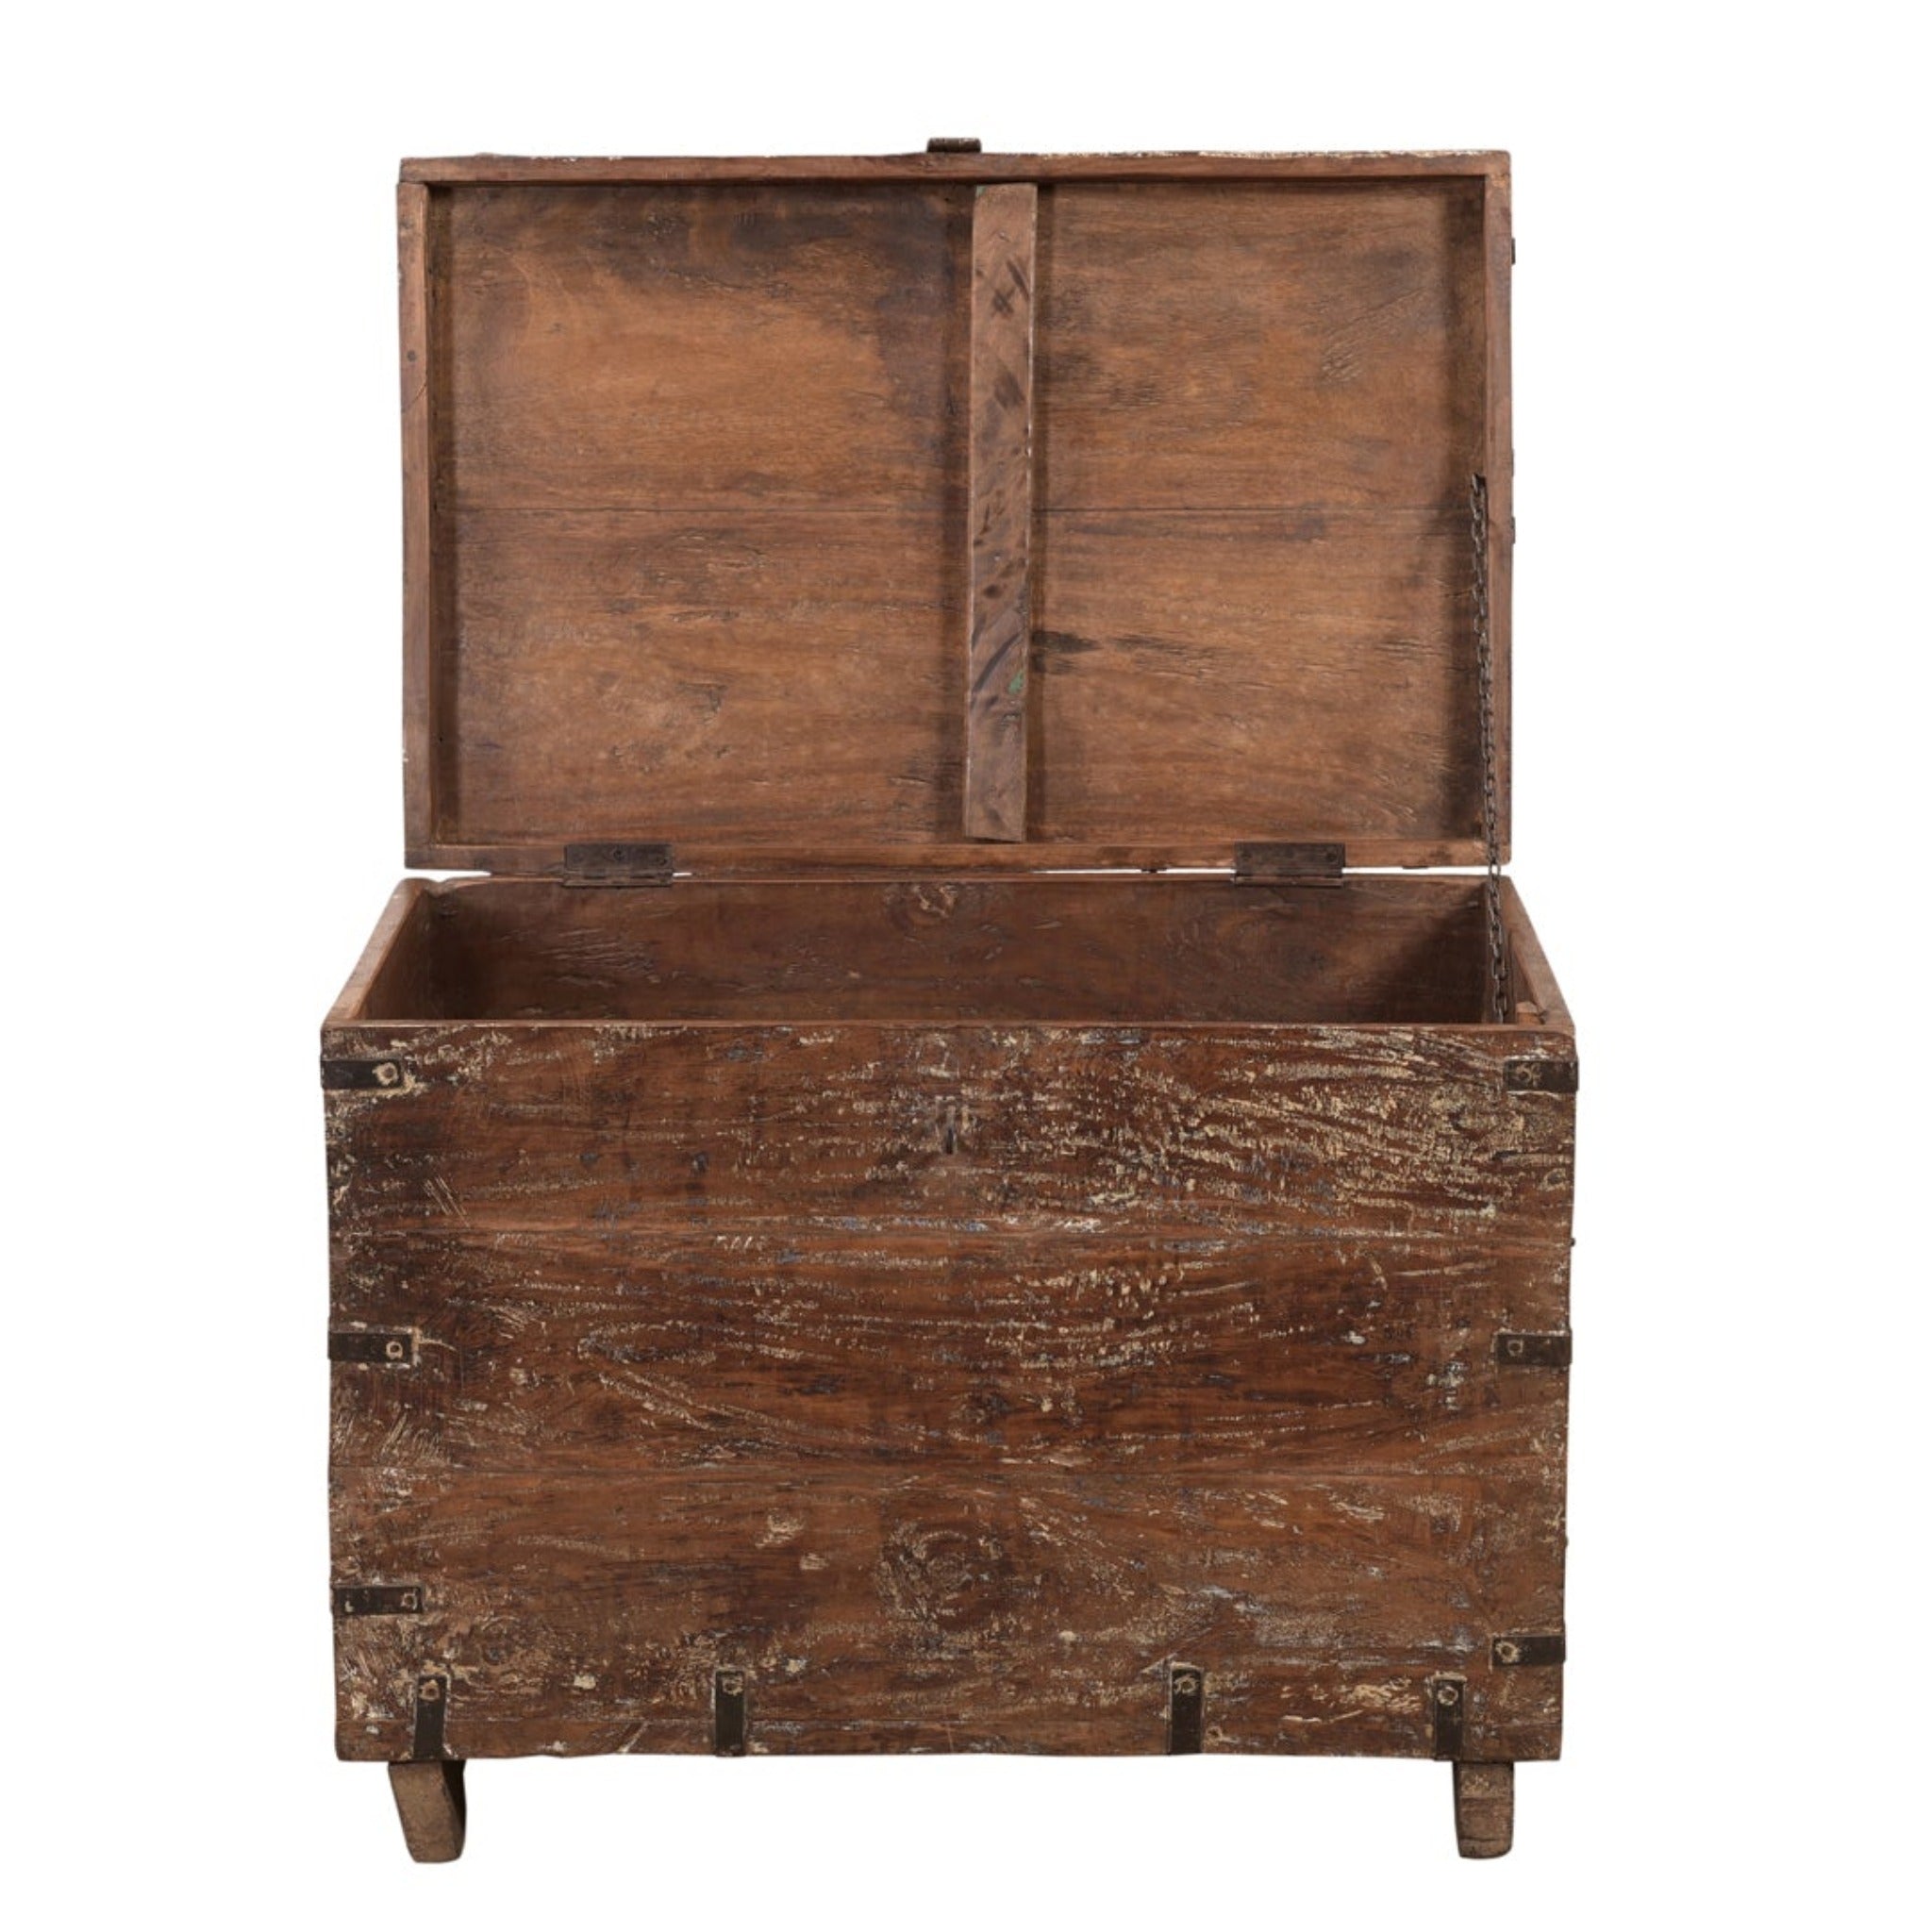 Grassland Land Trunk with open lid